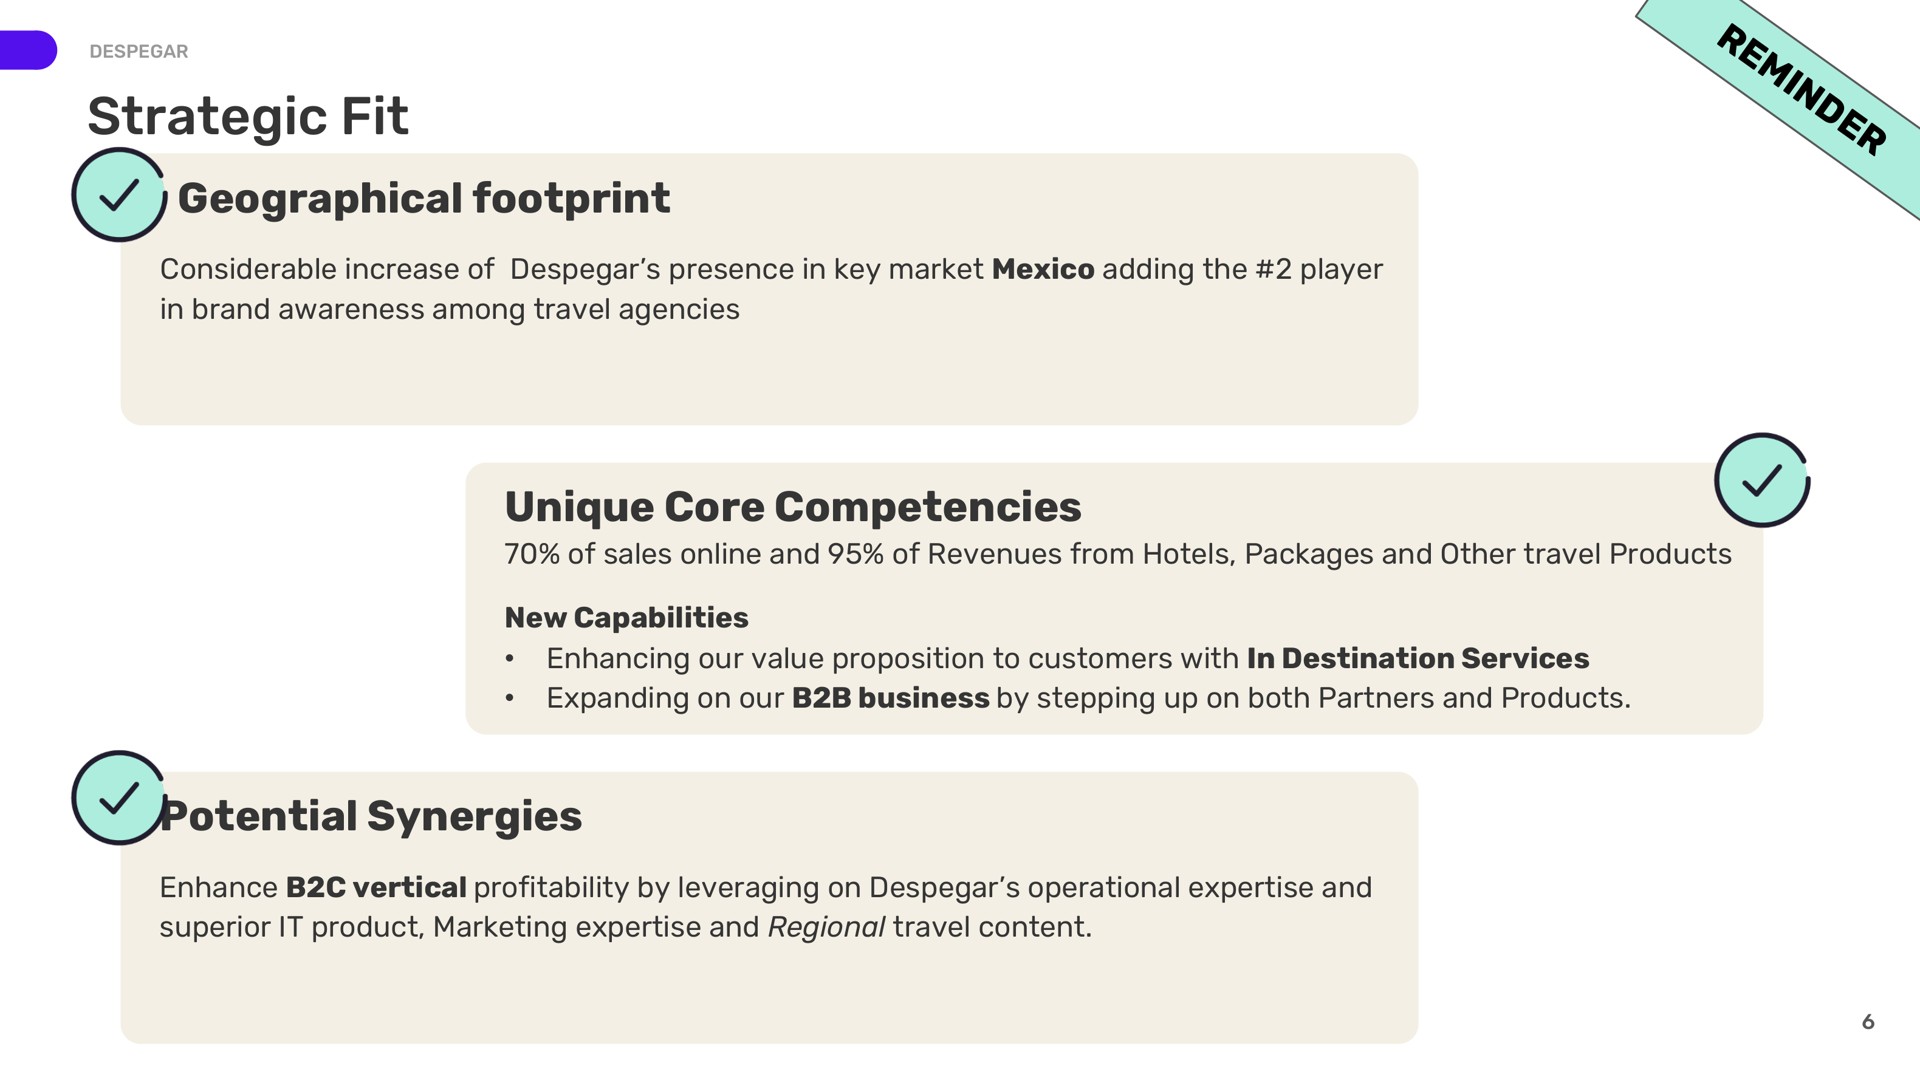 strategic fit geographical footprint unique core competencies potential synergies go | Despegar